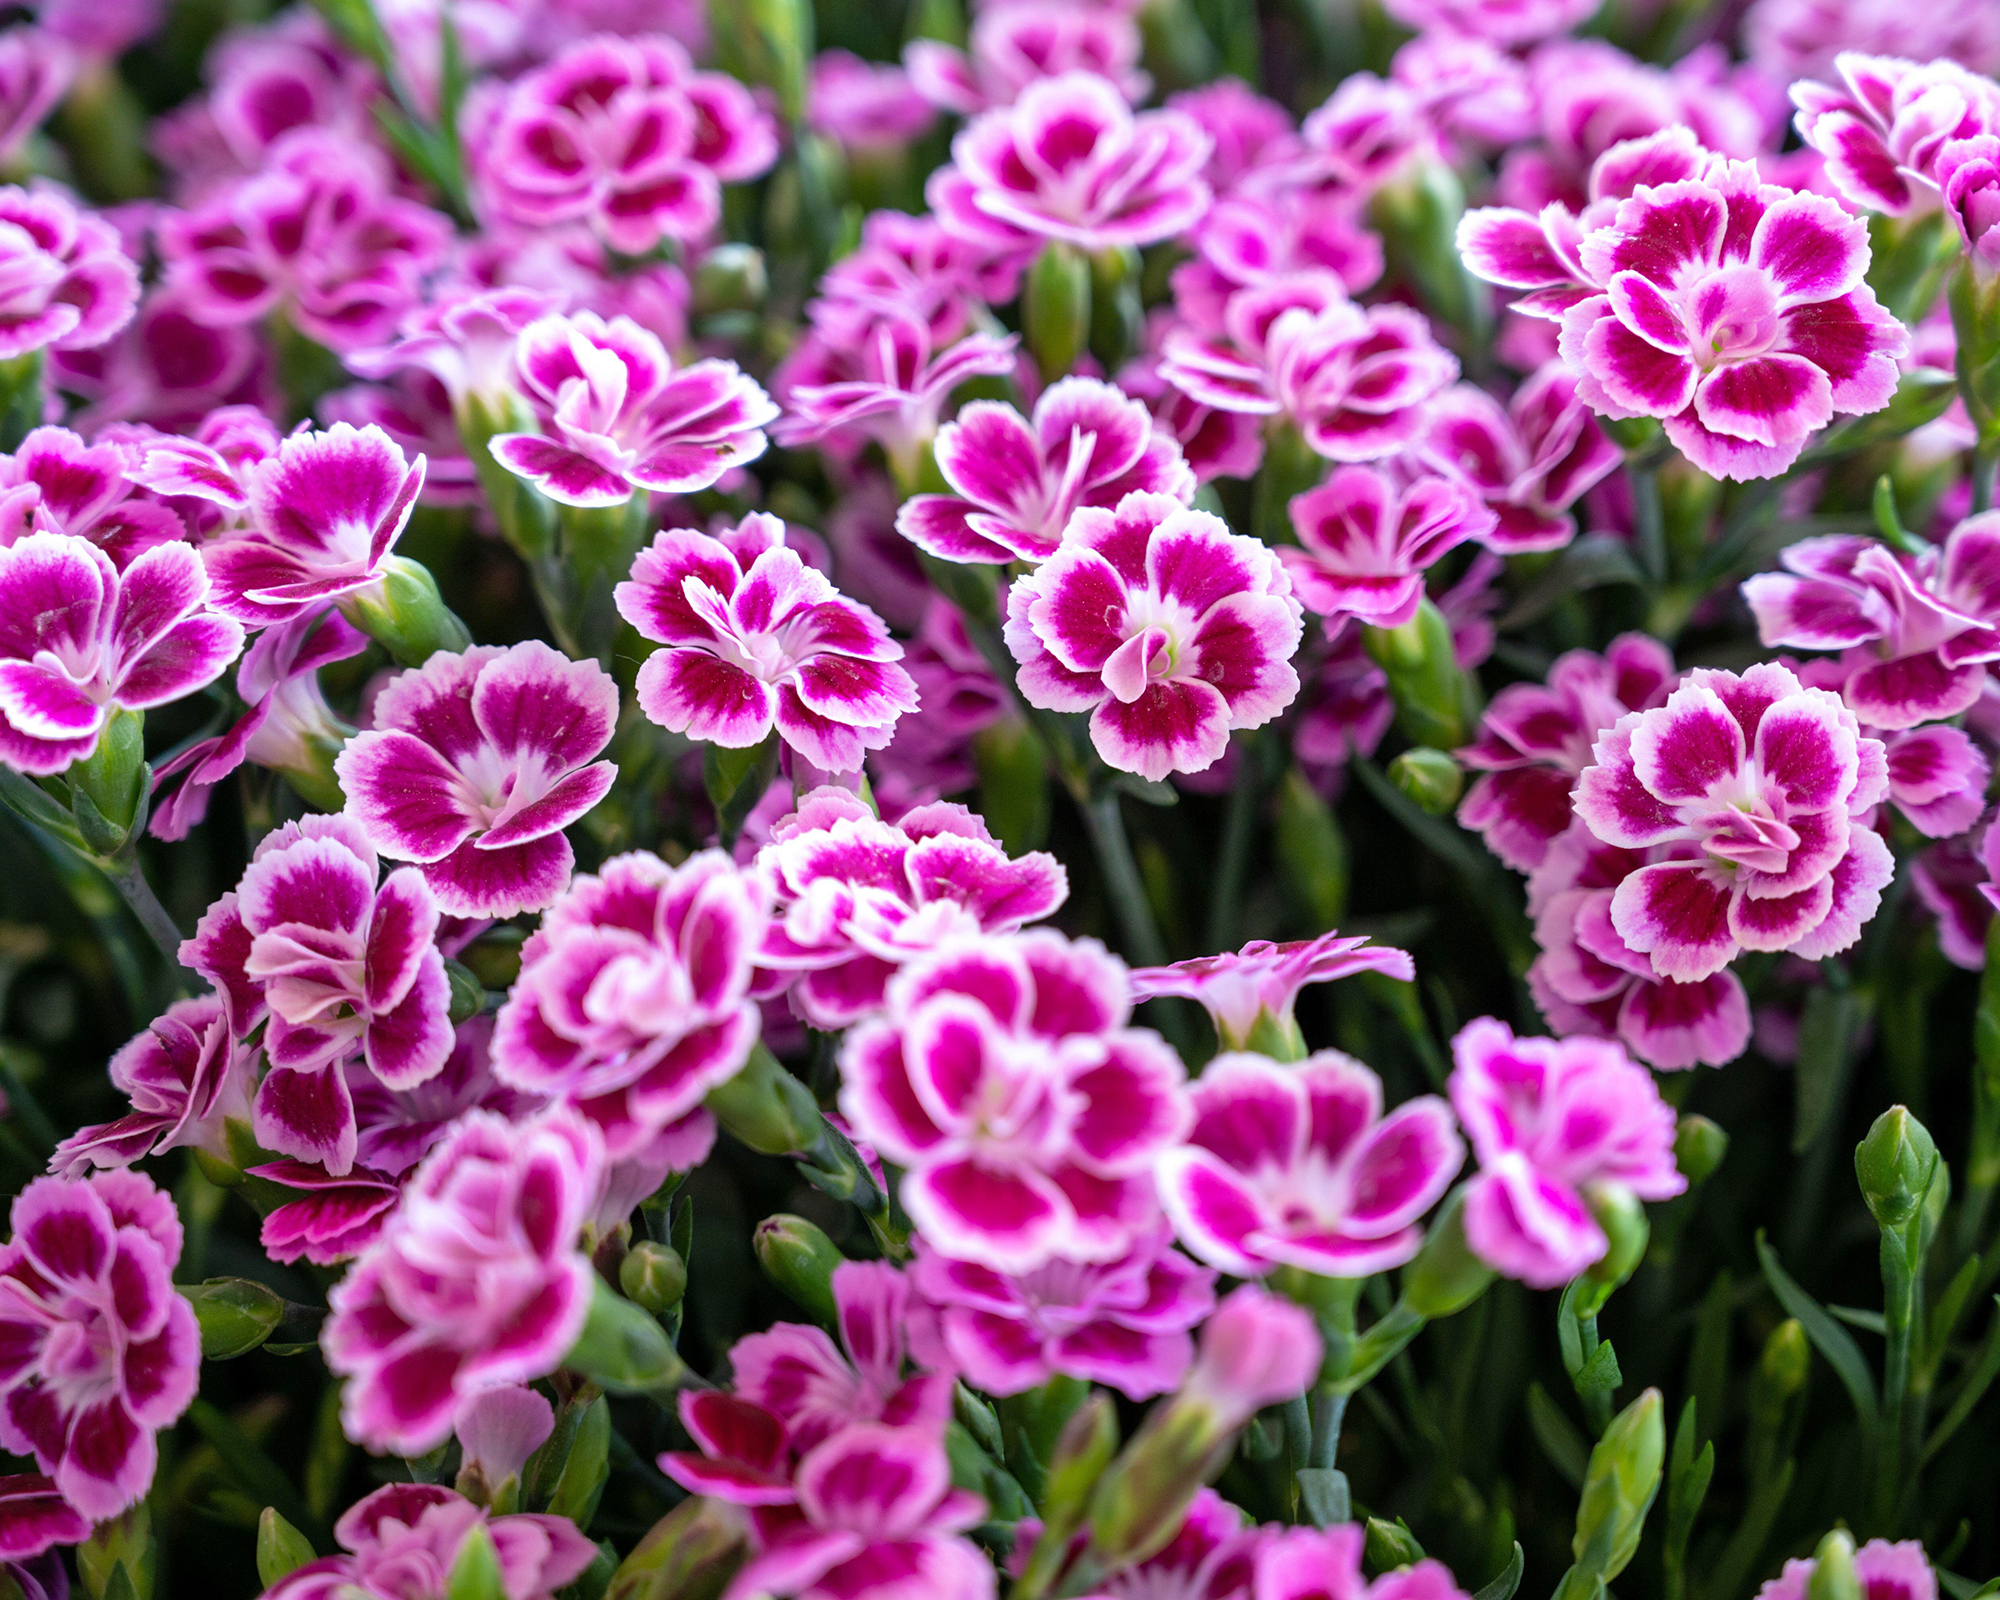 Dianthus flowers or pinks